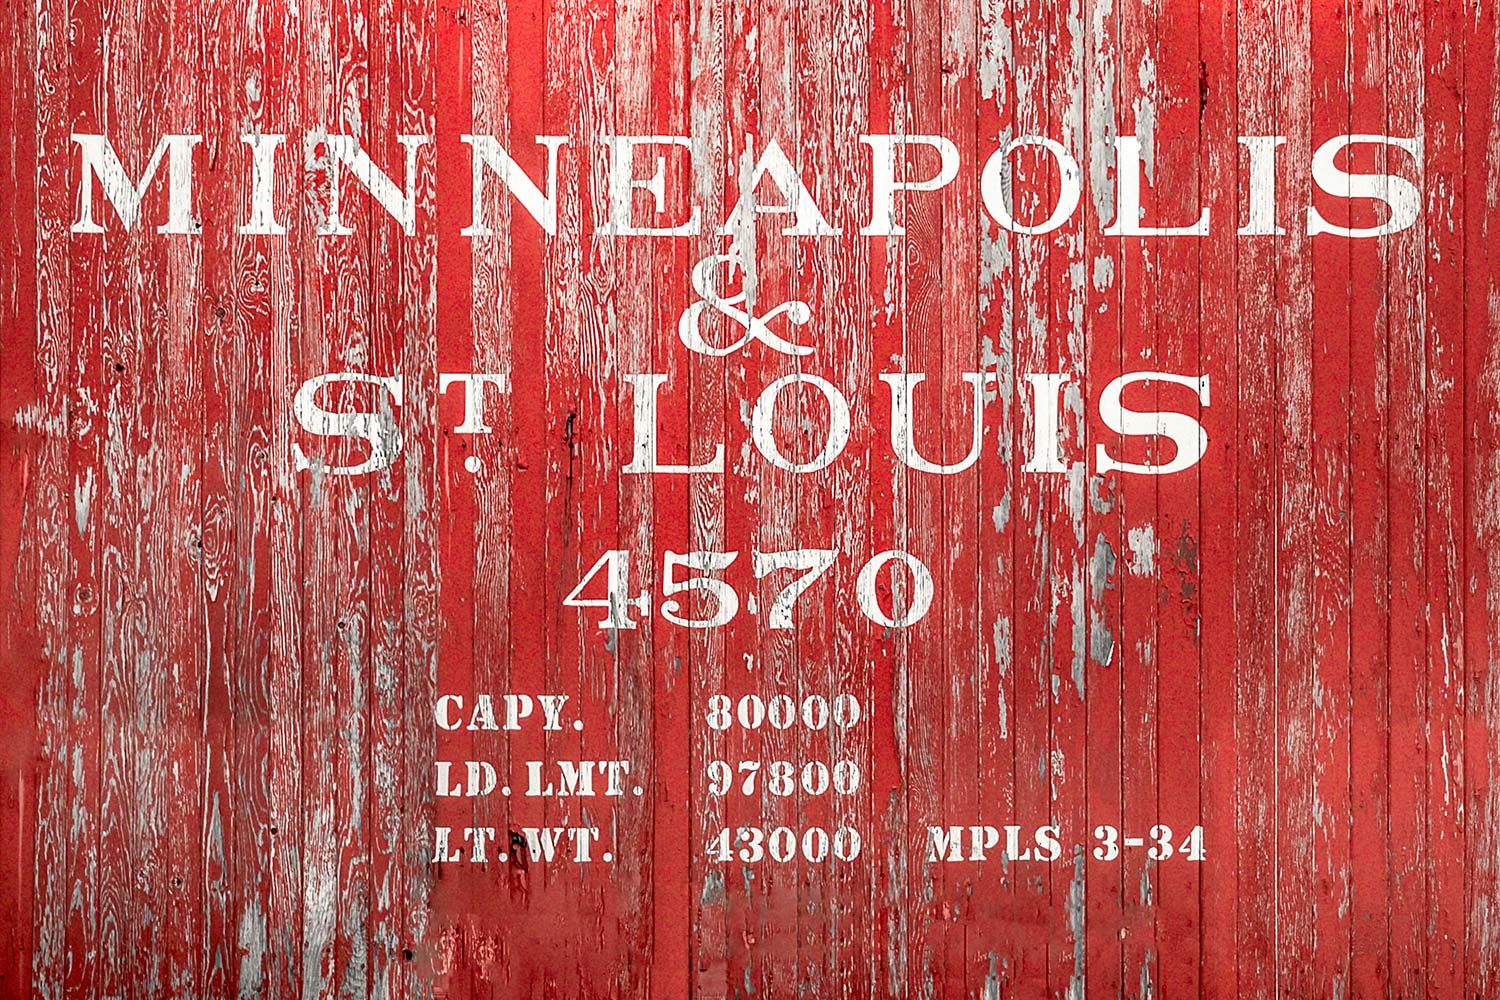 Minneapolis and St. Louis